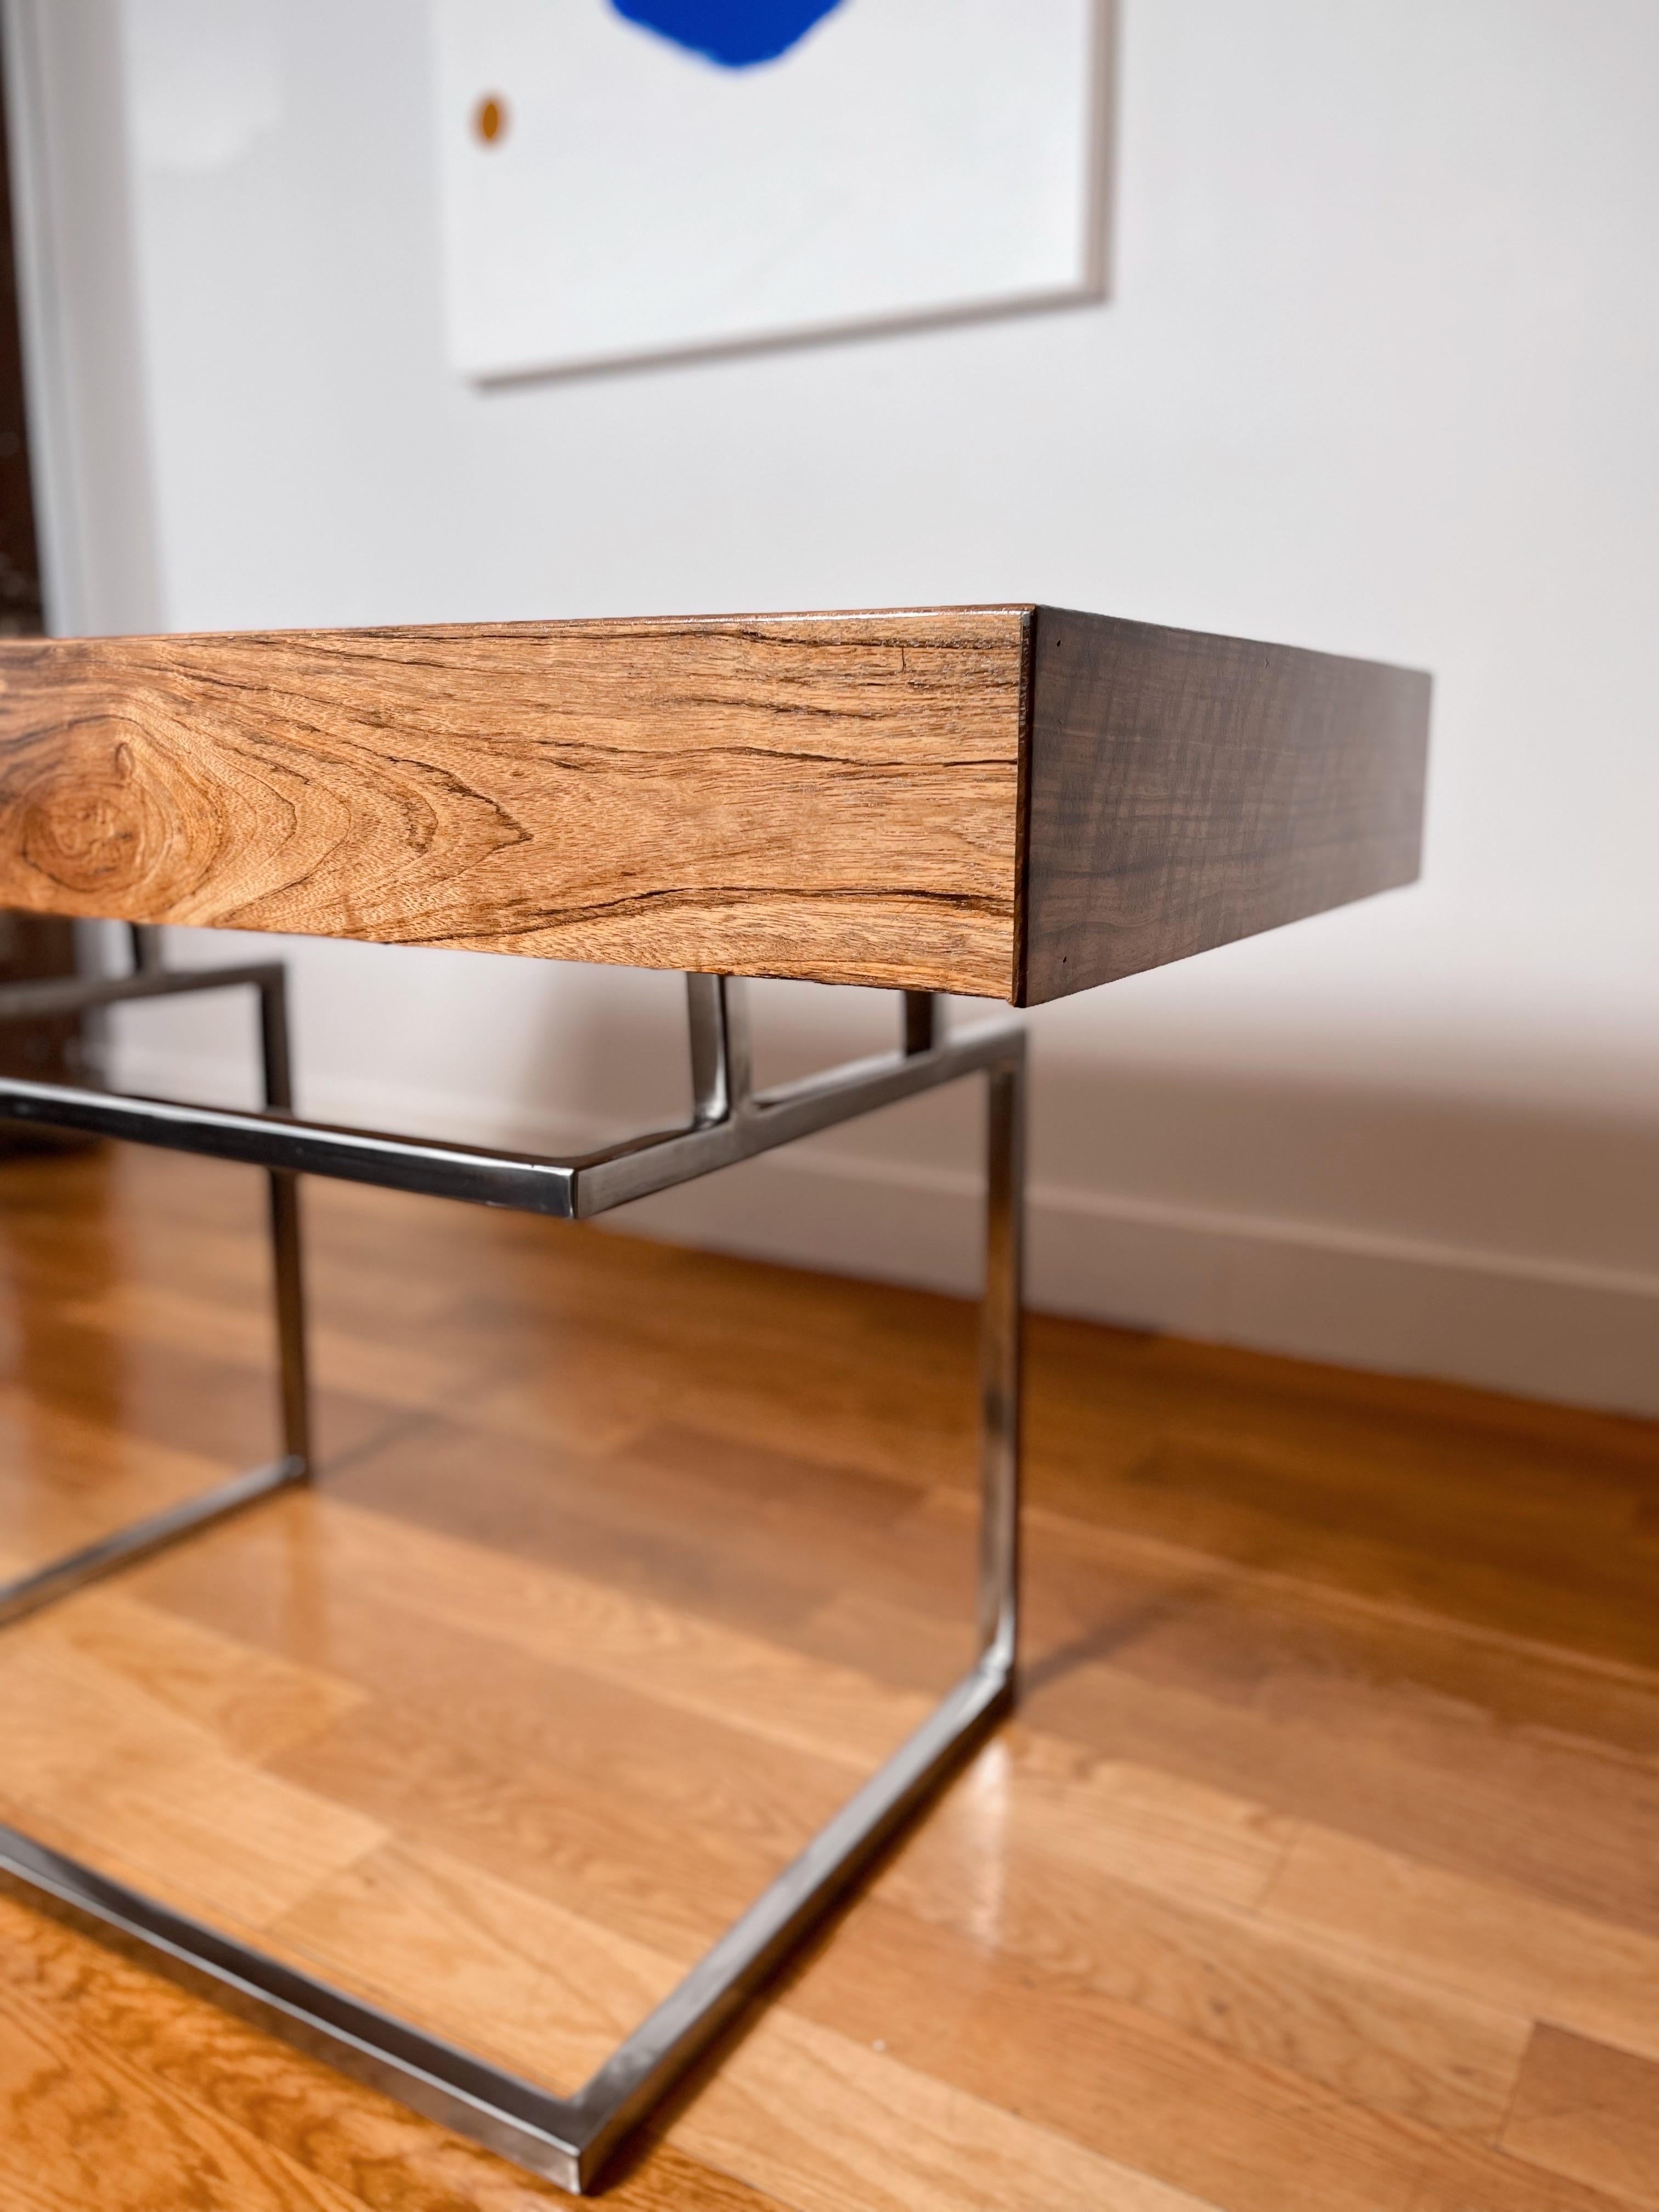 This desk is comprised of exotic Shedua hardwood and a solid hand polished stainless steel base. The three equal sized drawers provide plenty of storage for pens, small electronics and papers/documents. The beveled edge drawer fronts are reminiscent